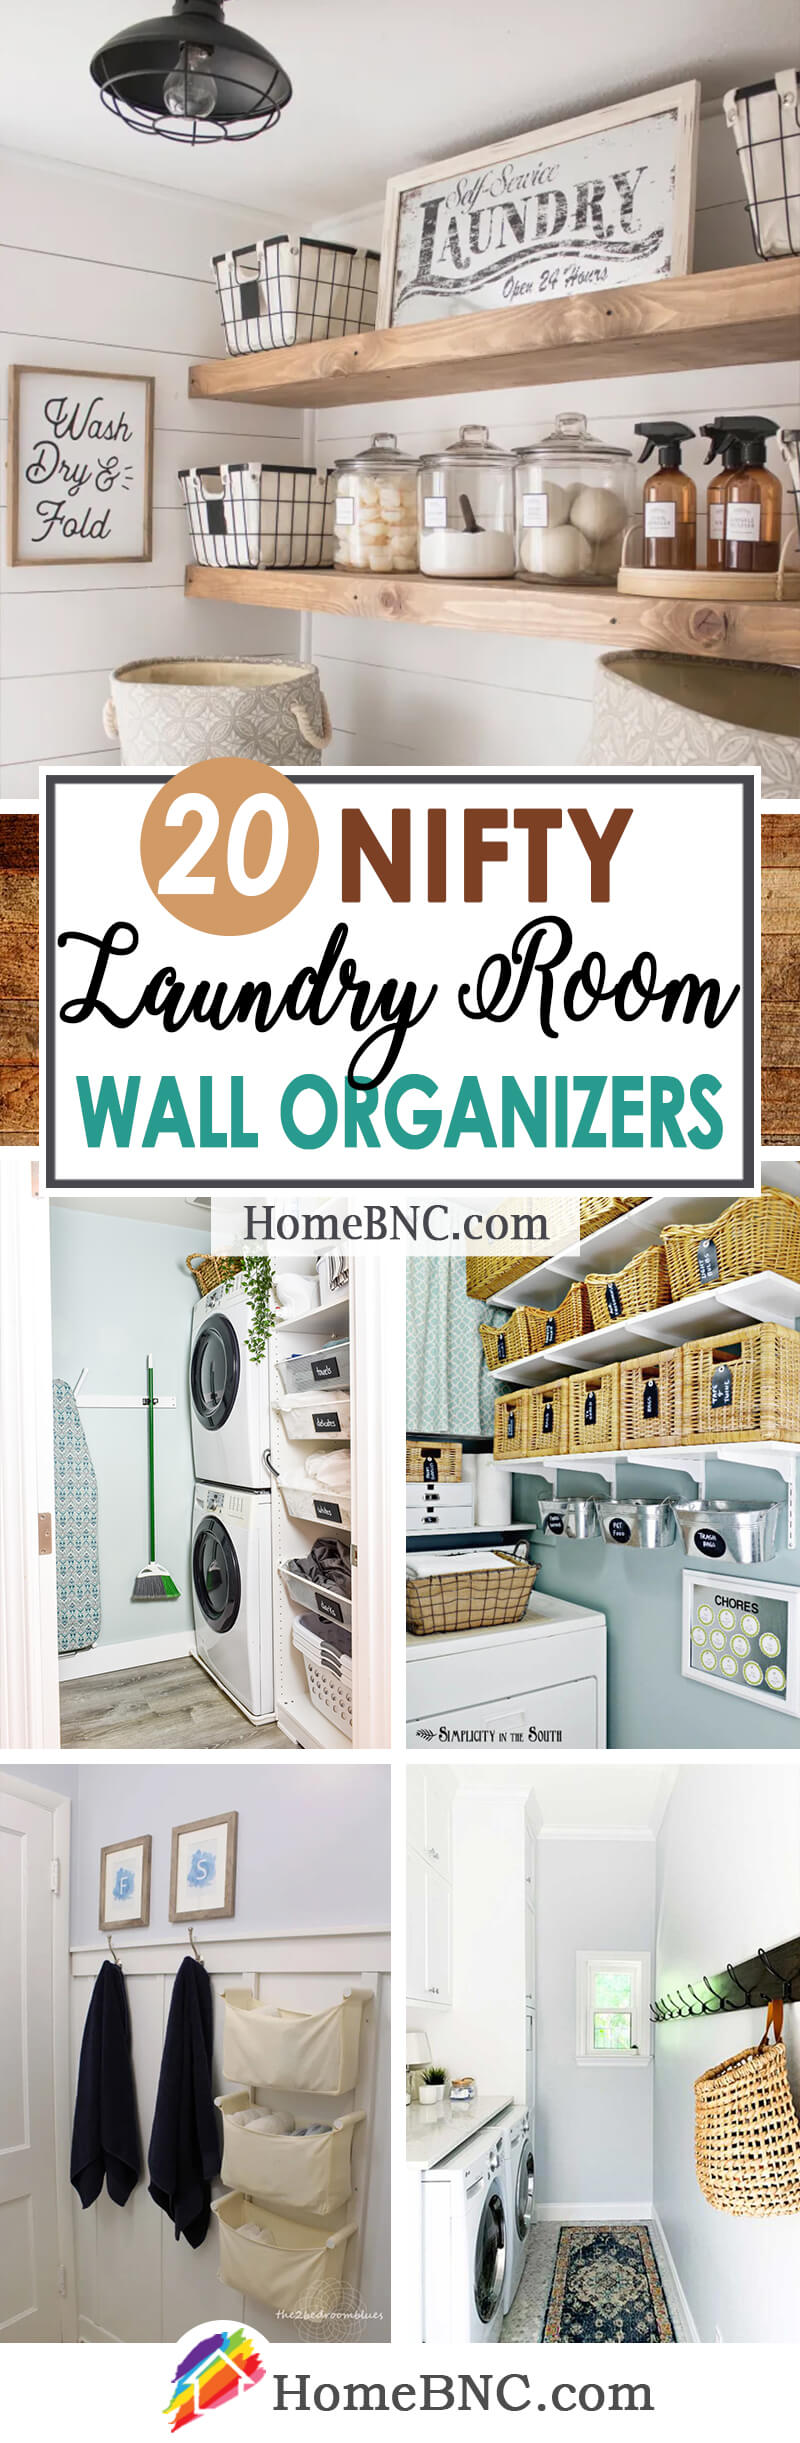 Wall Organizer for Laundry Room